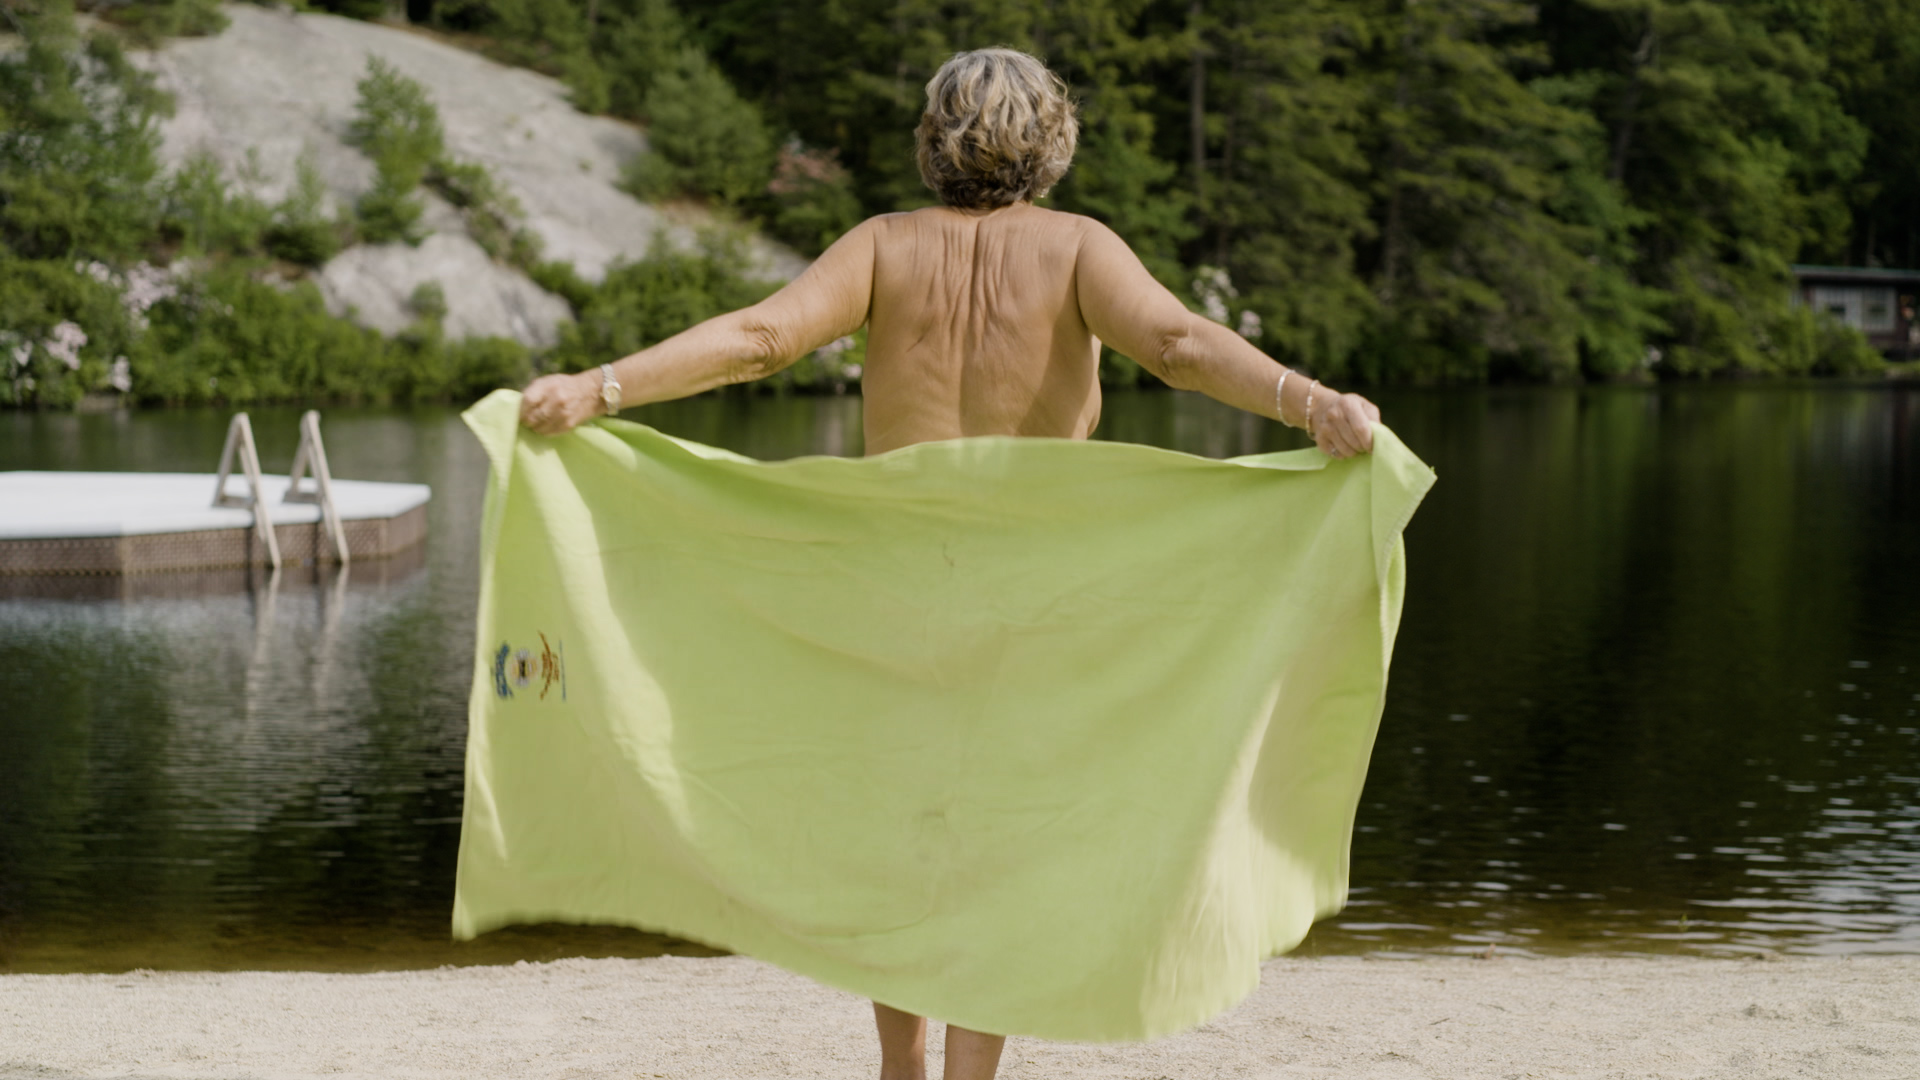 Nudist explains what you should definitely not do at a nude beach photo photo